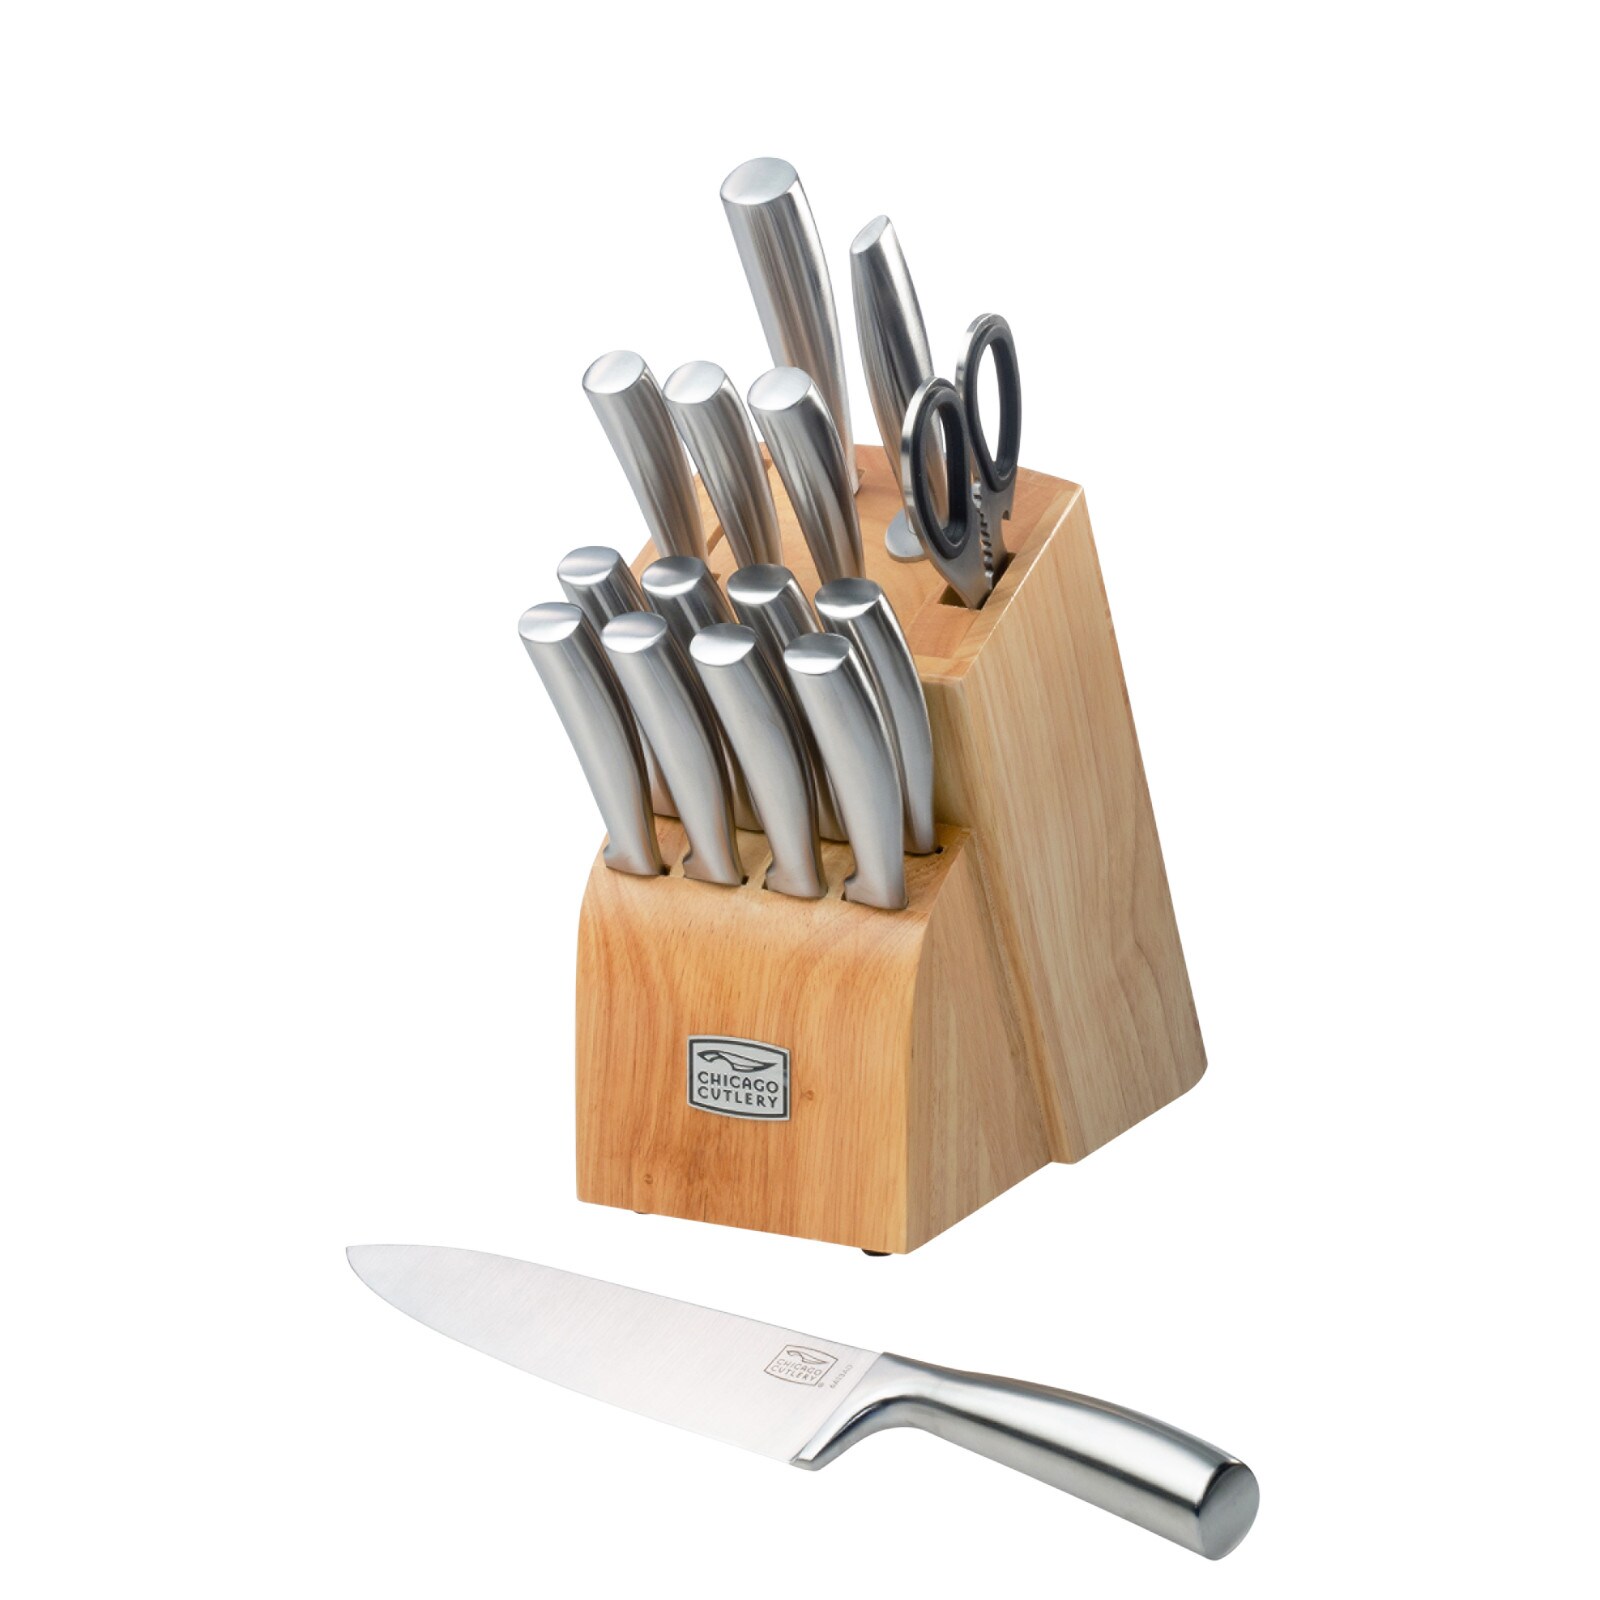 Chicago Cutlery ProHold Coated 14 pc Block Set - Stainless Steel Blades,  Plastic Handles, Includes Chef, Bread, Utility, Santoku Knives and Steak